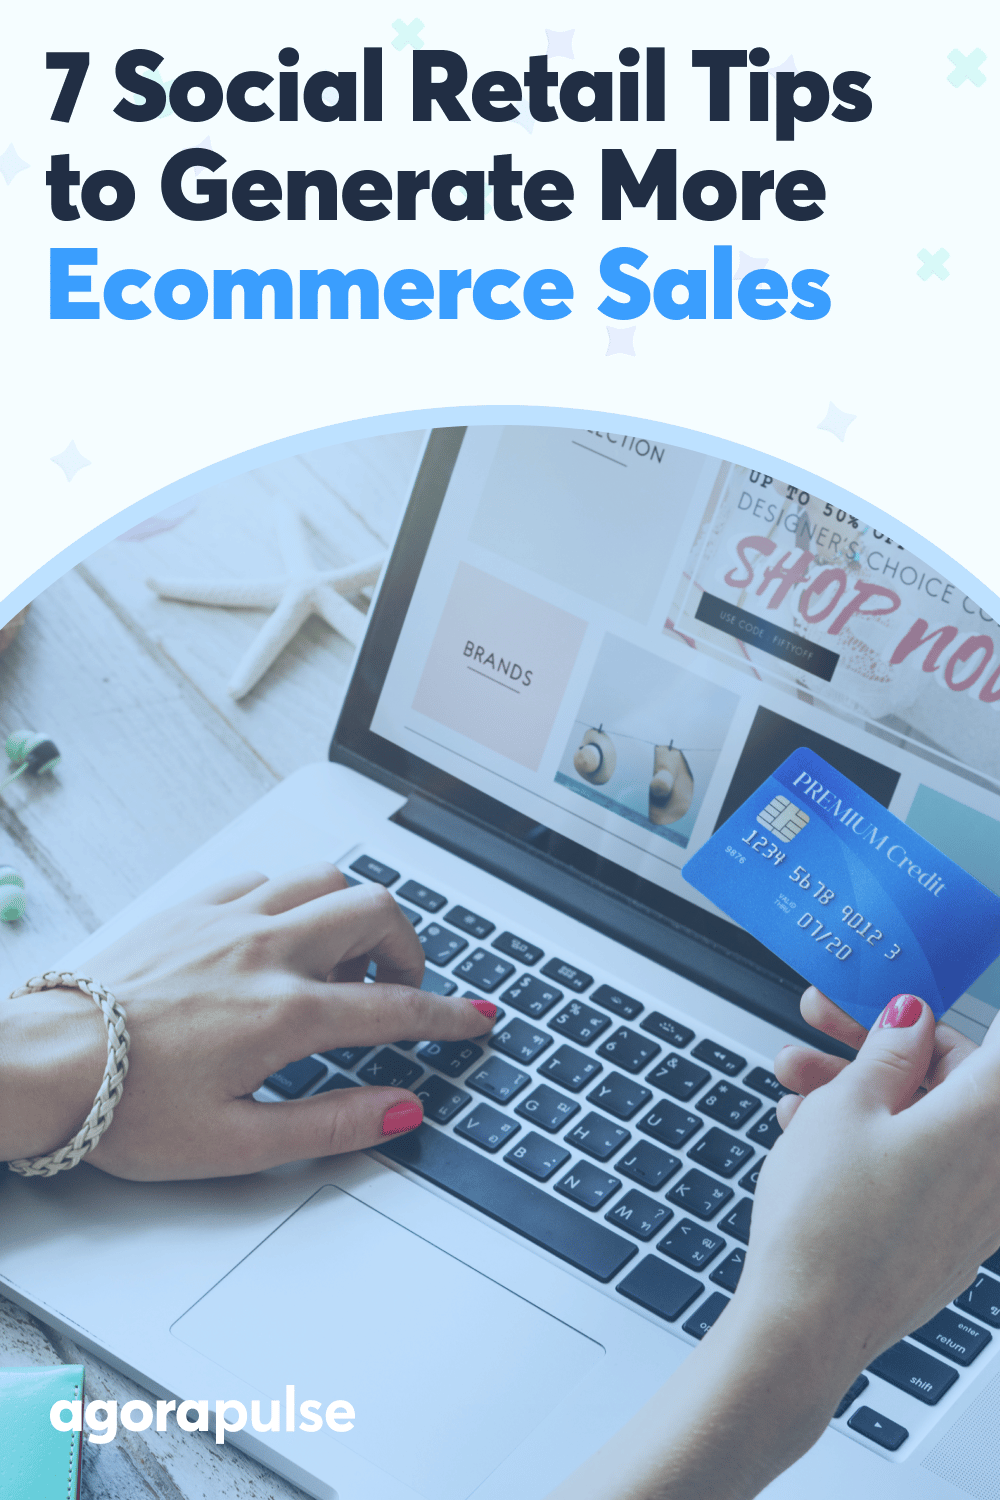 7 Social Retail Tips to Help E-Commerce Generate More Sales